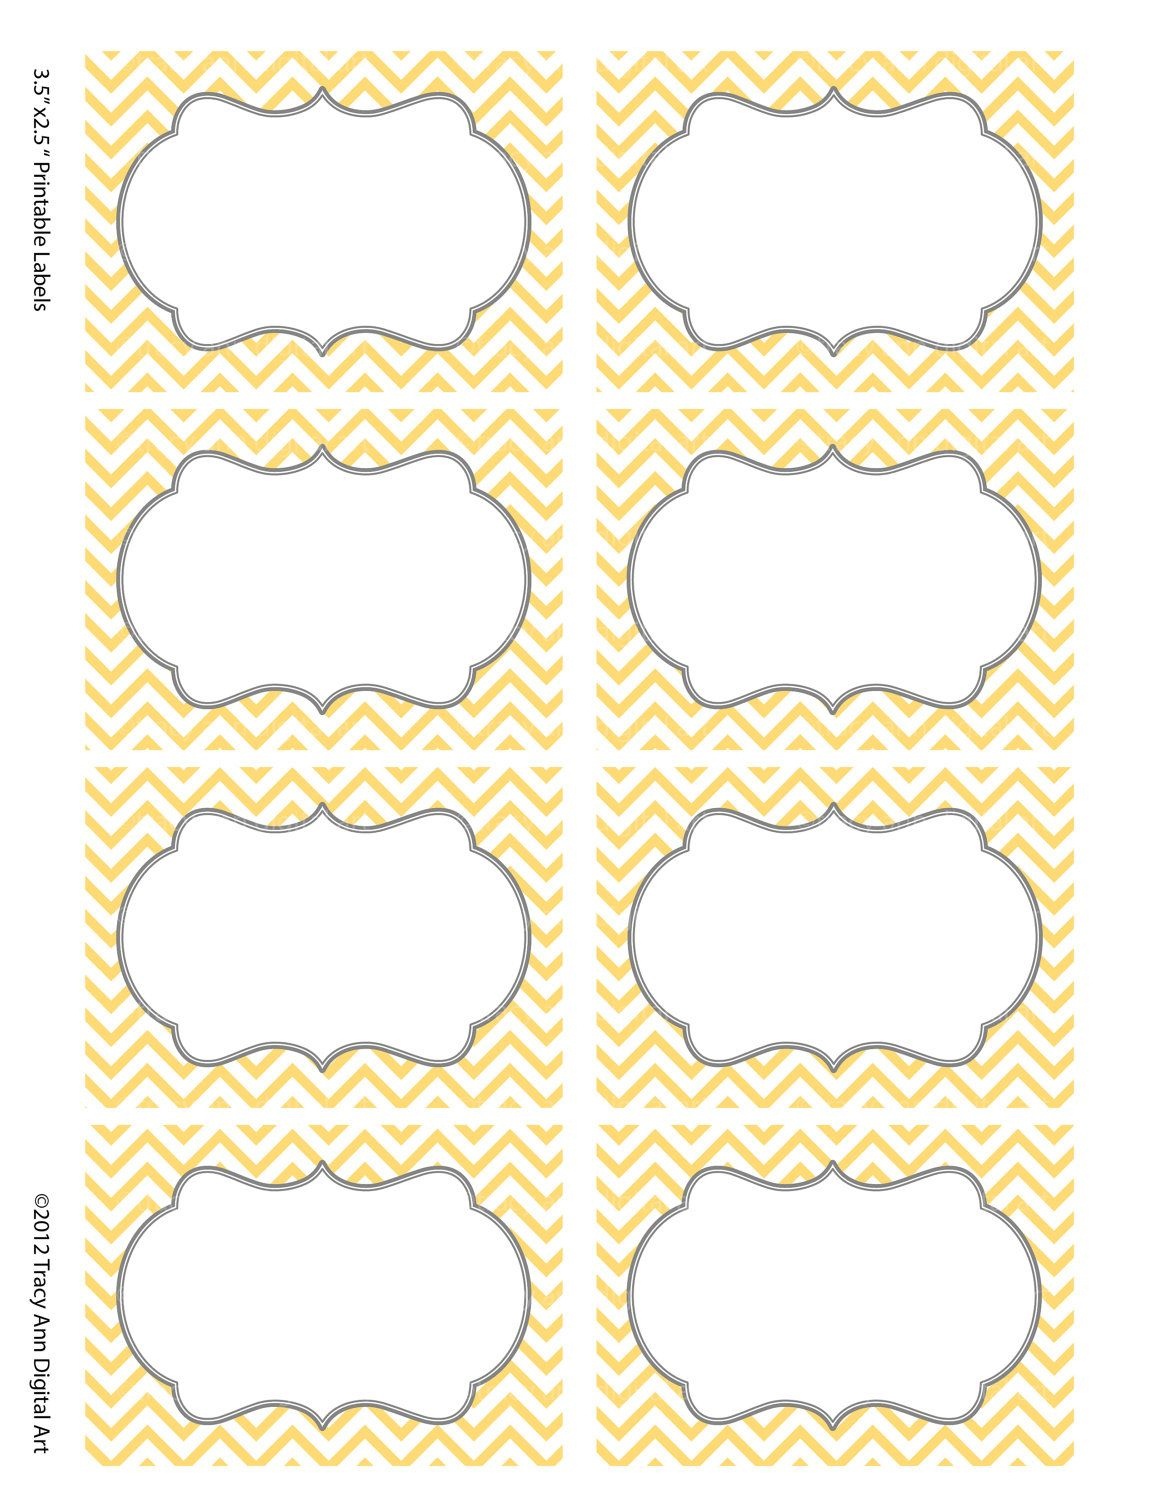 Chevron Labels Print Your Own Labels Yellow And Grey | Printables - Free Printable Chevron Labels